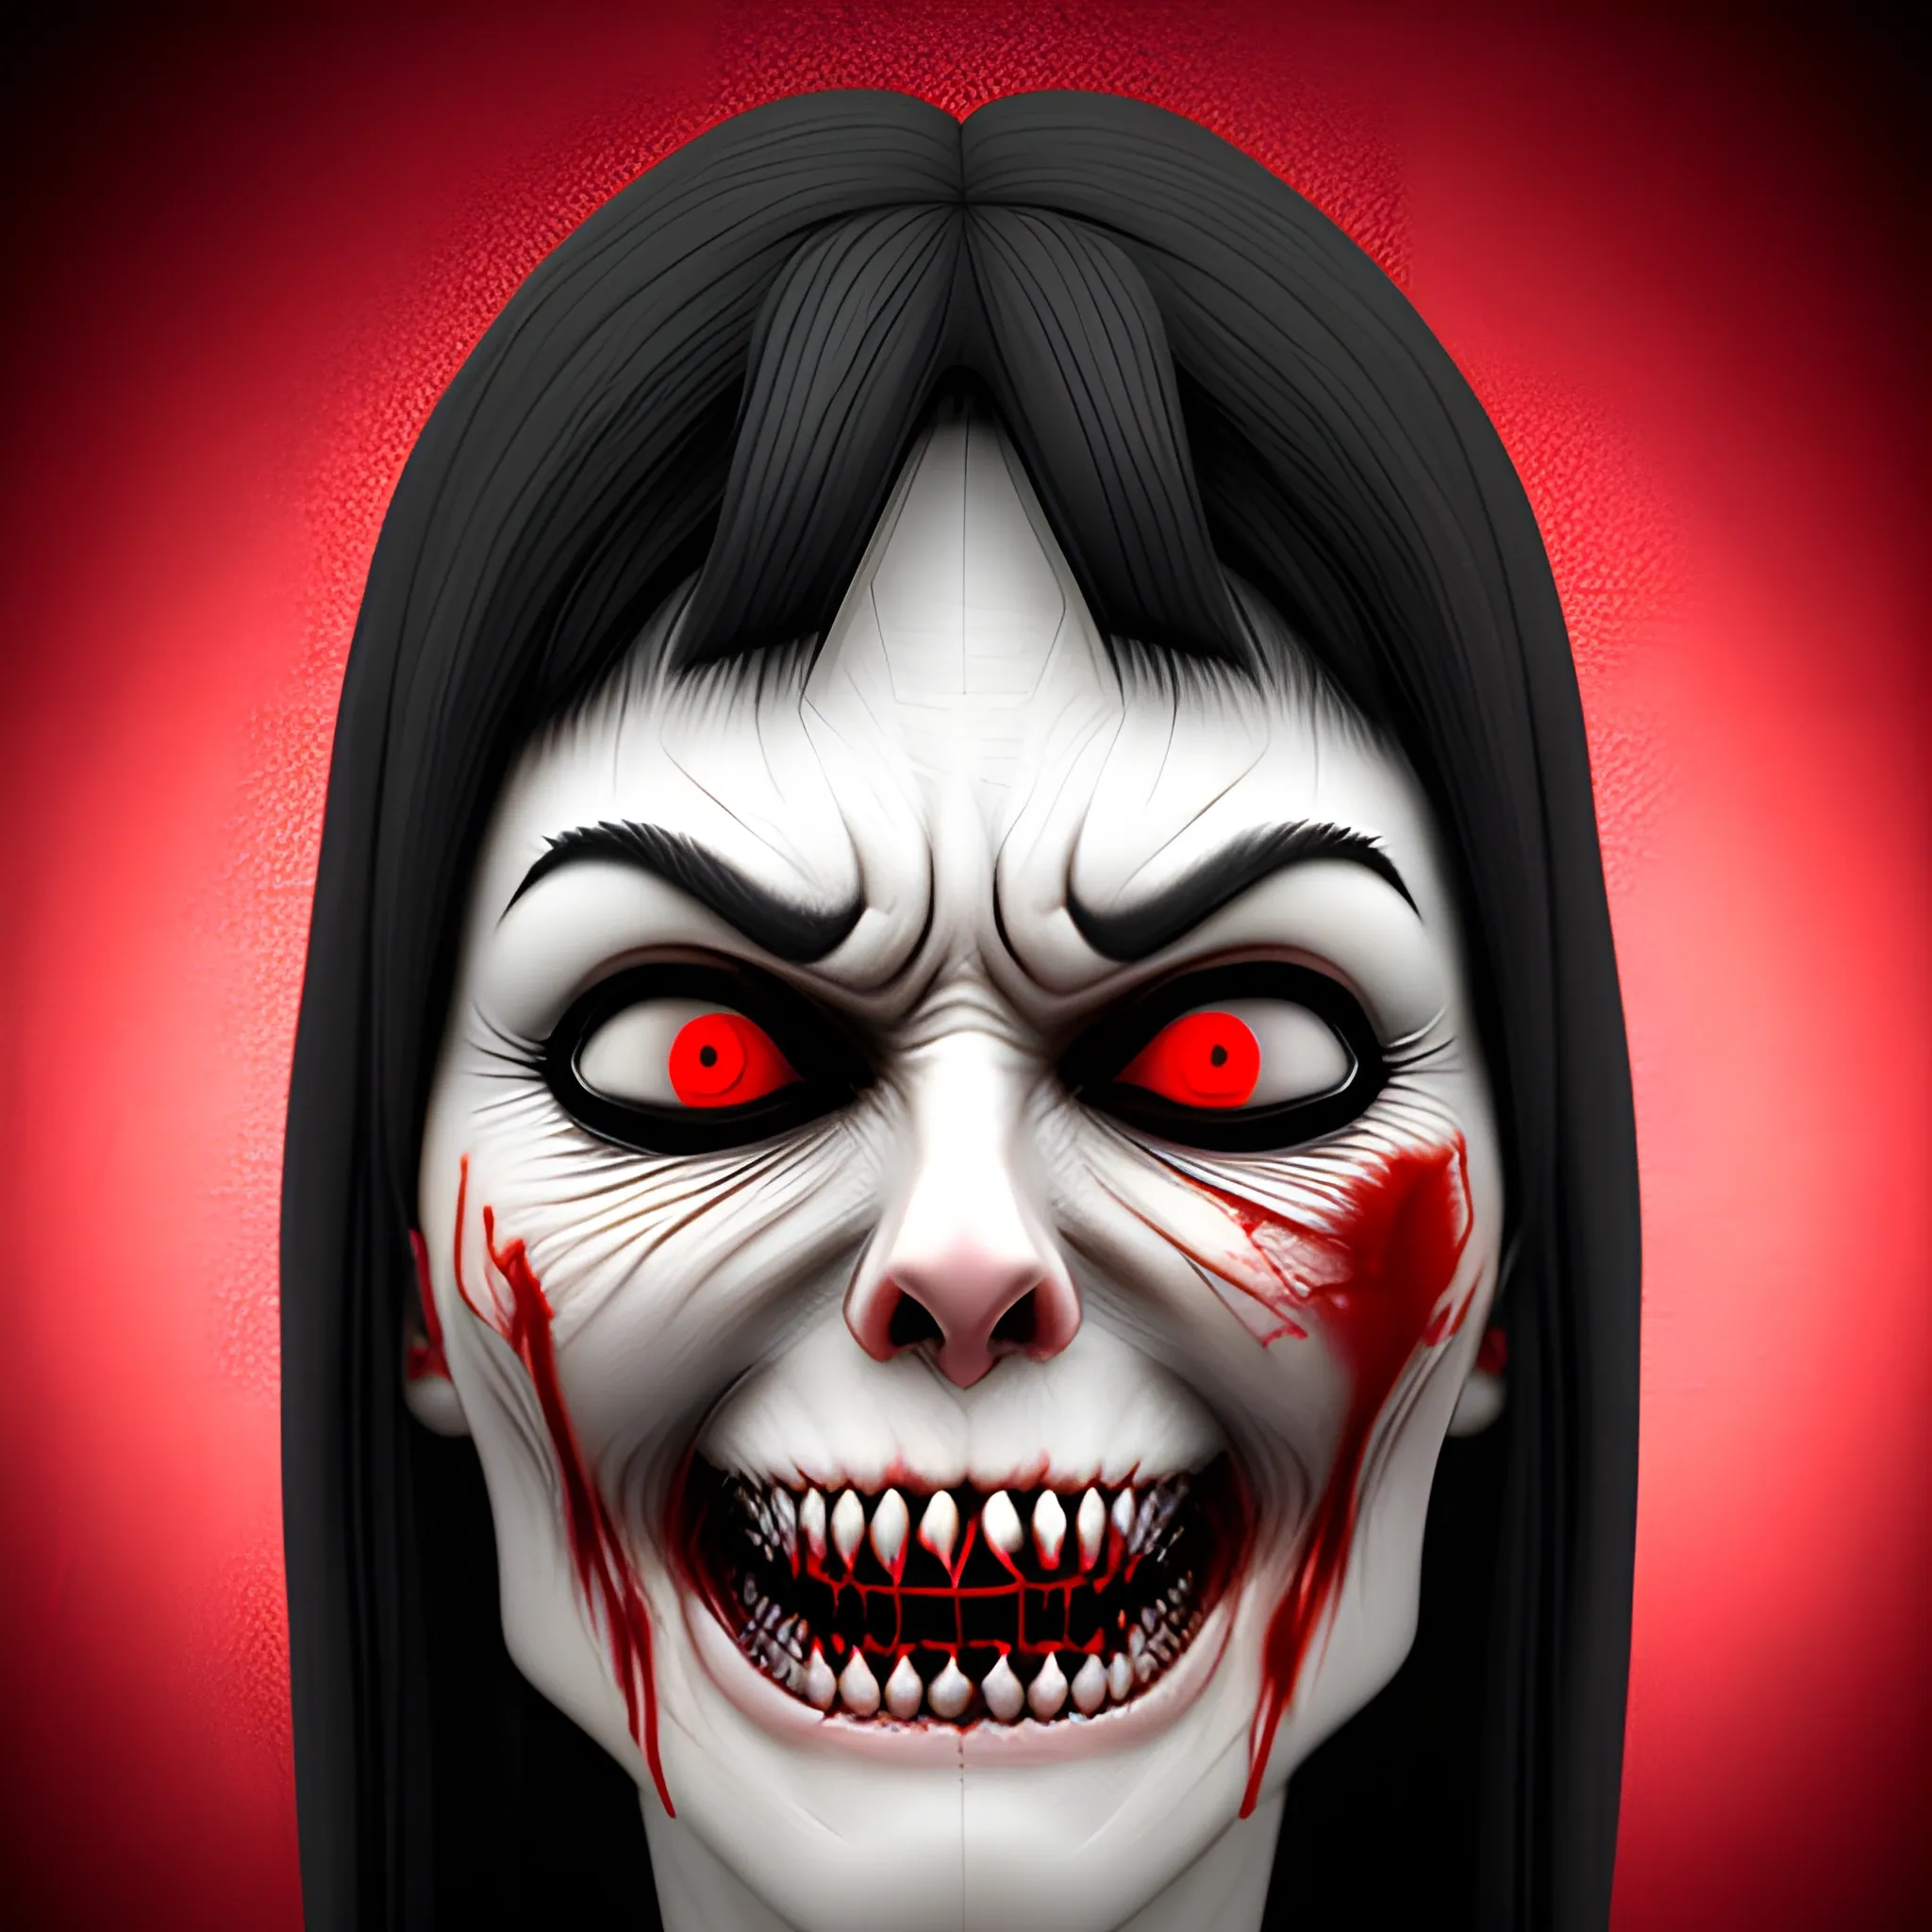 creepy girl with sharp teeth's in her cheeks with blood, 3D